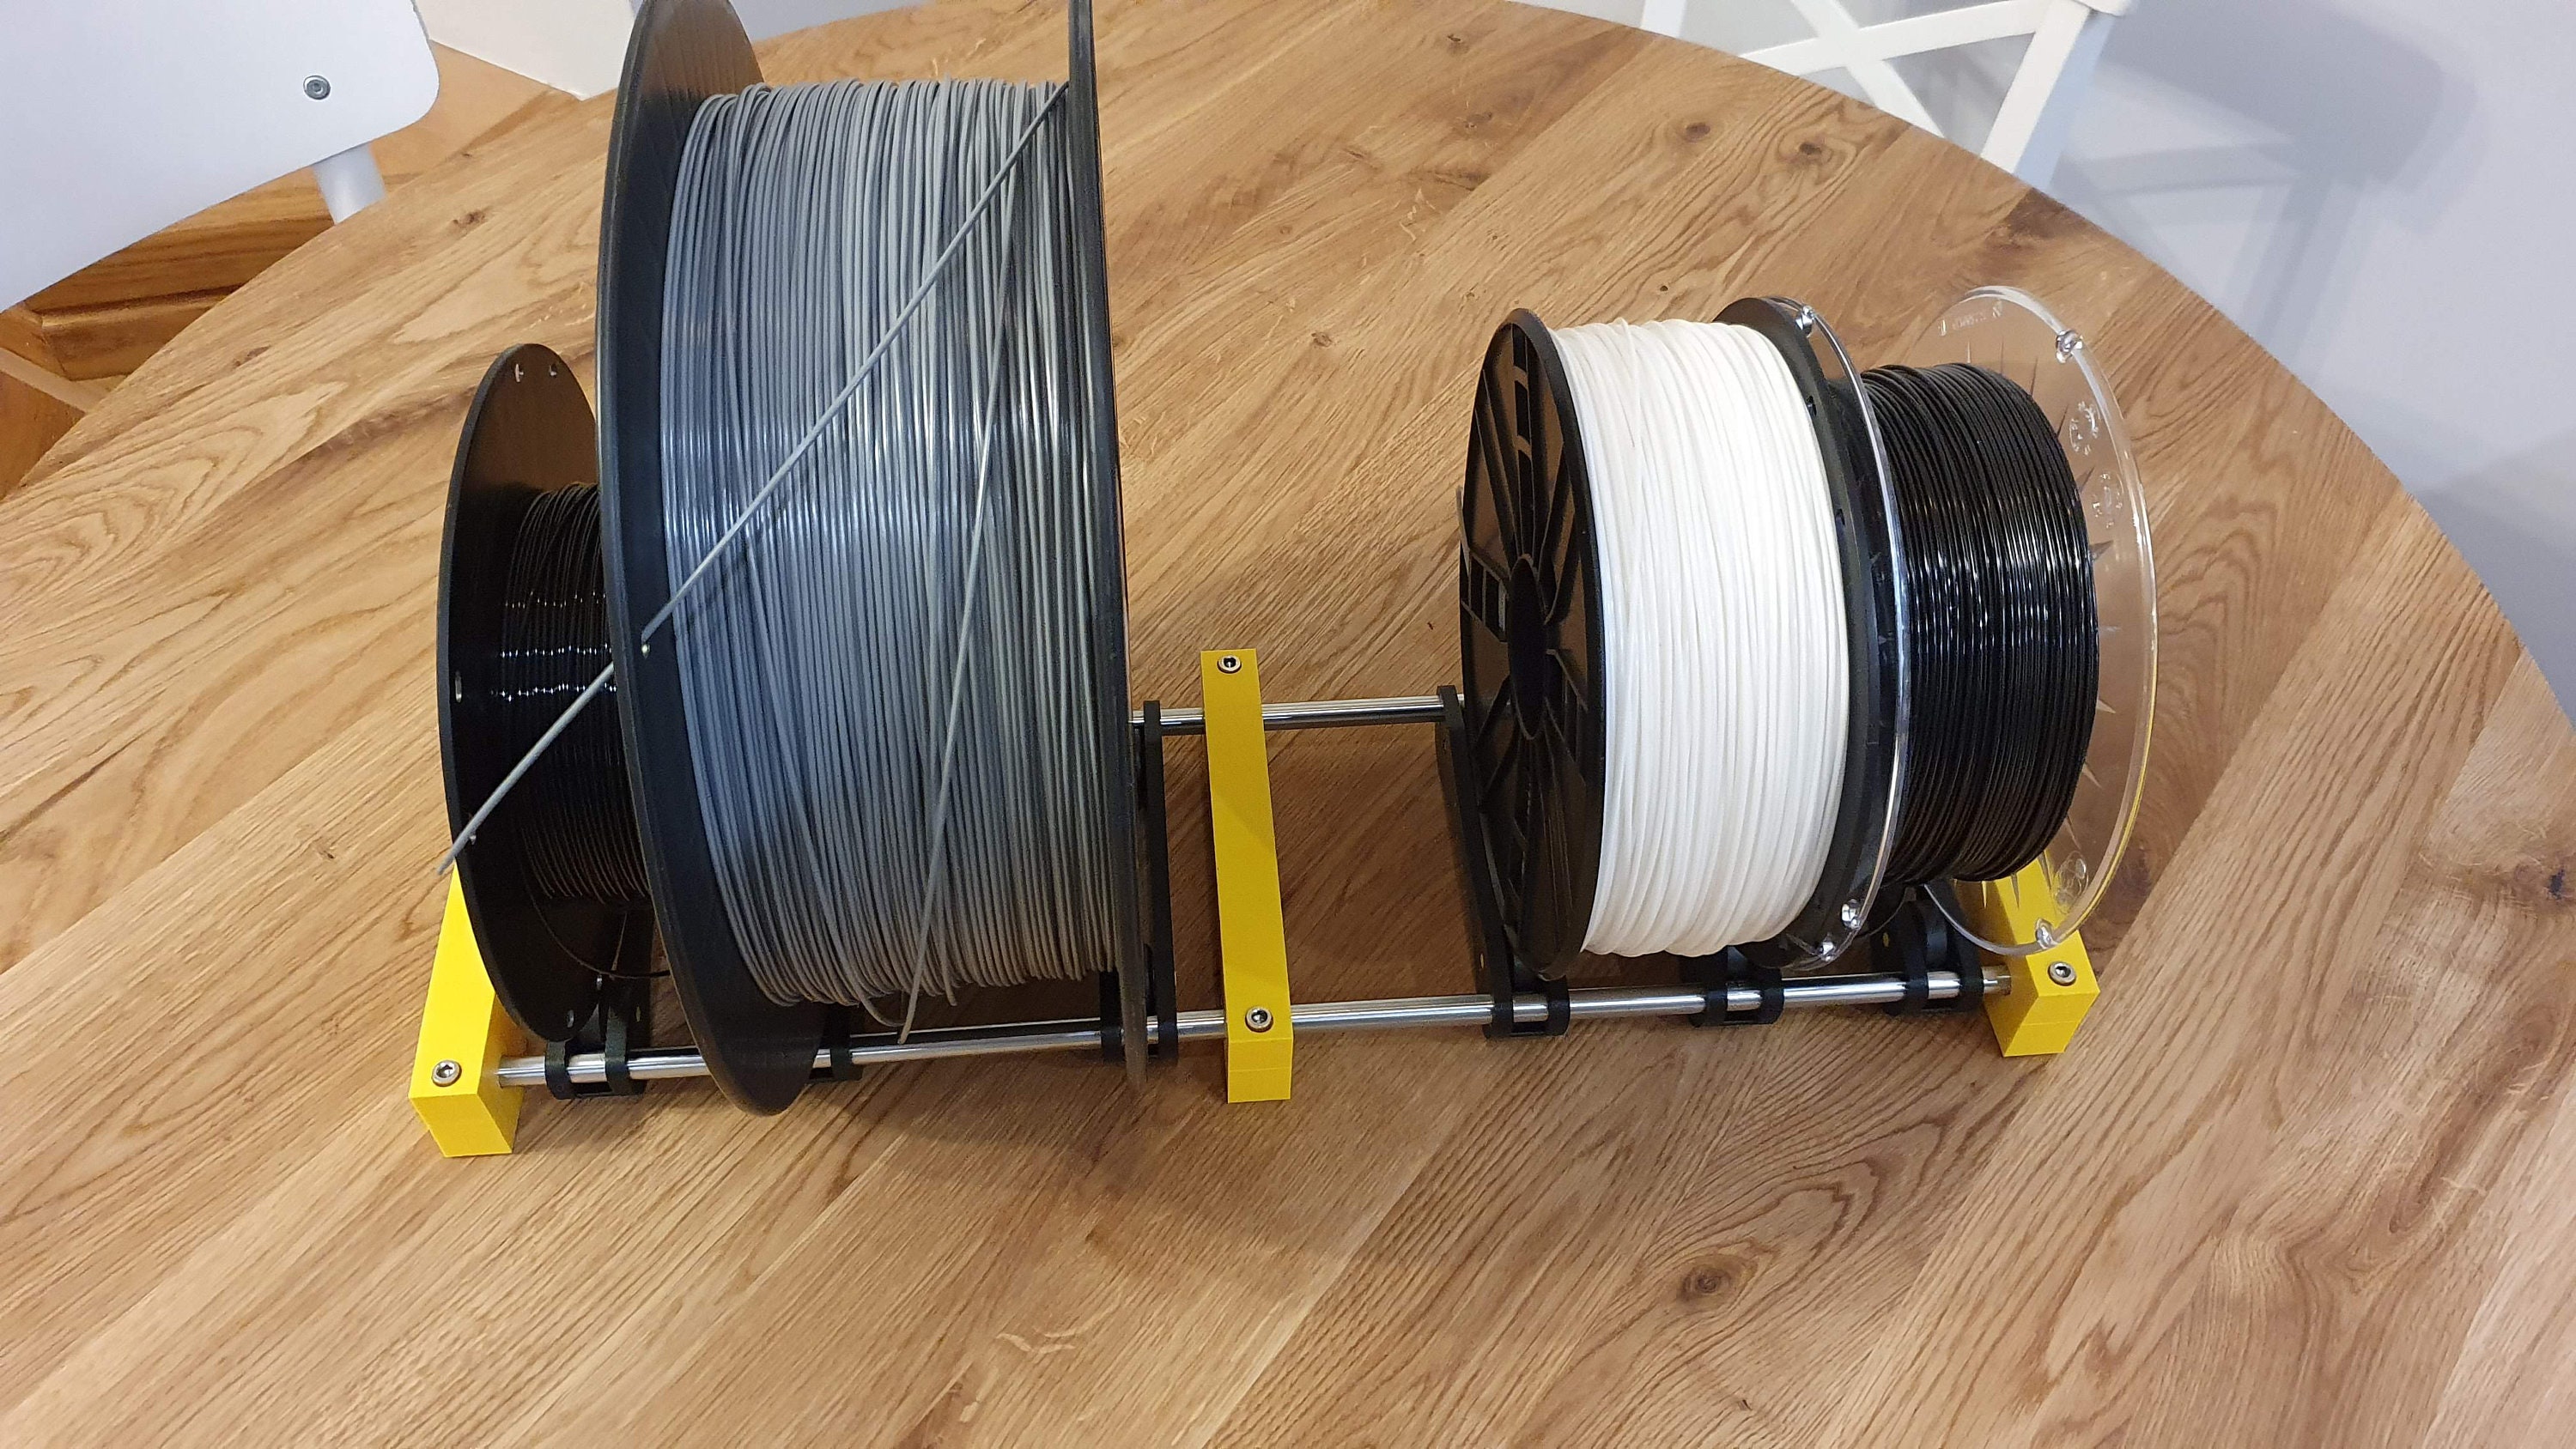 Spool Holder for up to 3Kg Filament Rolls – 3D UP Fitters